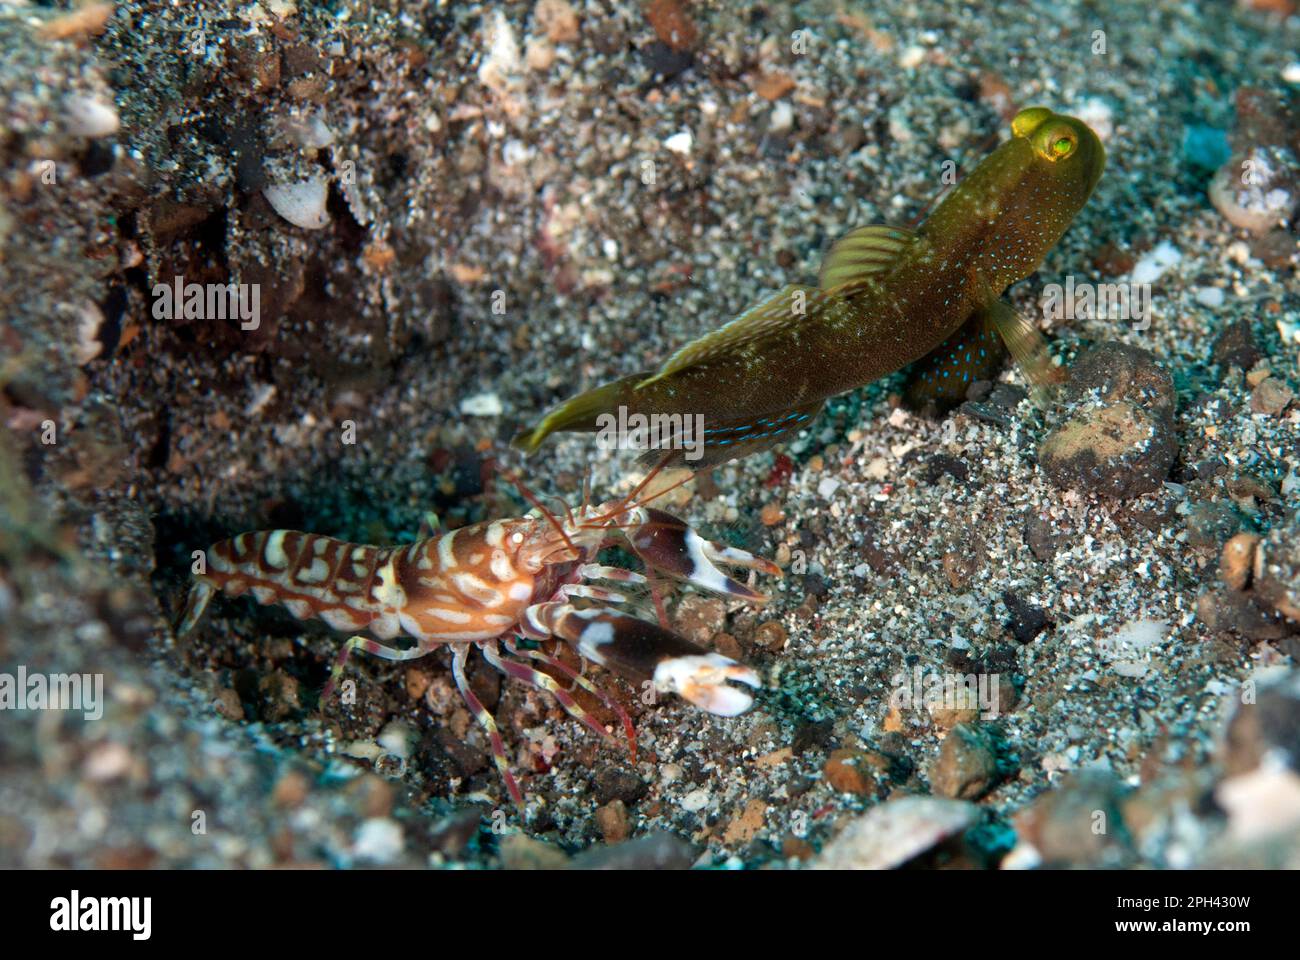 Variable shrimp gobie (Cryptocentrus fasciatus) adult, with snapping shrimp (Alpheus spec.) at the entrance of the burrow in the sand, Lembeh Strait Stock Photo